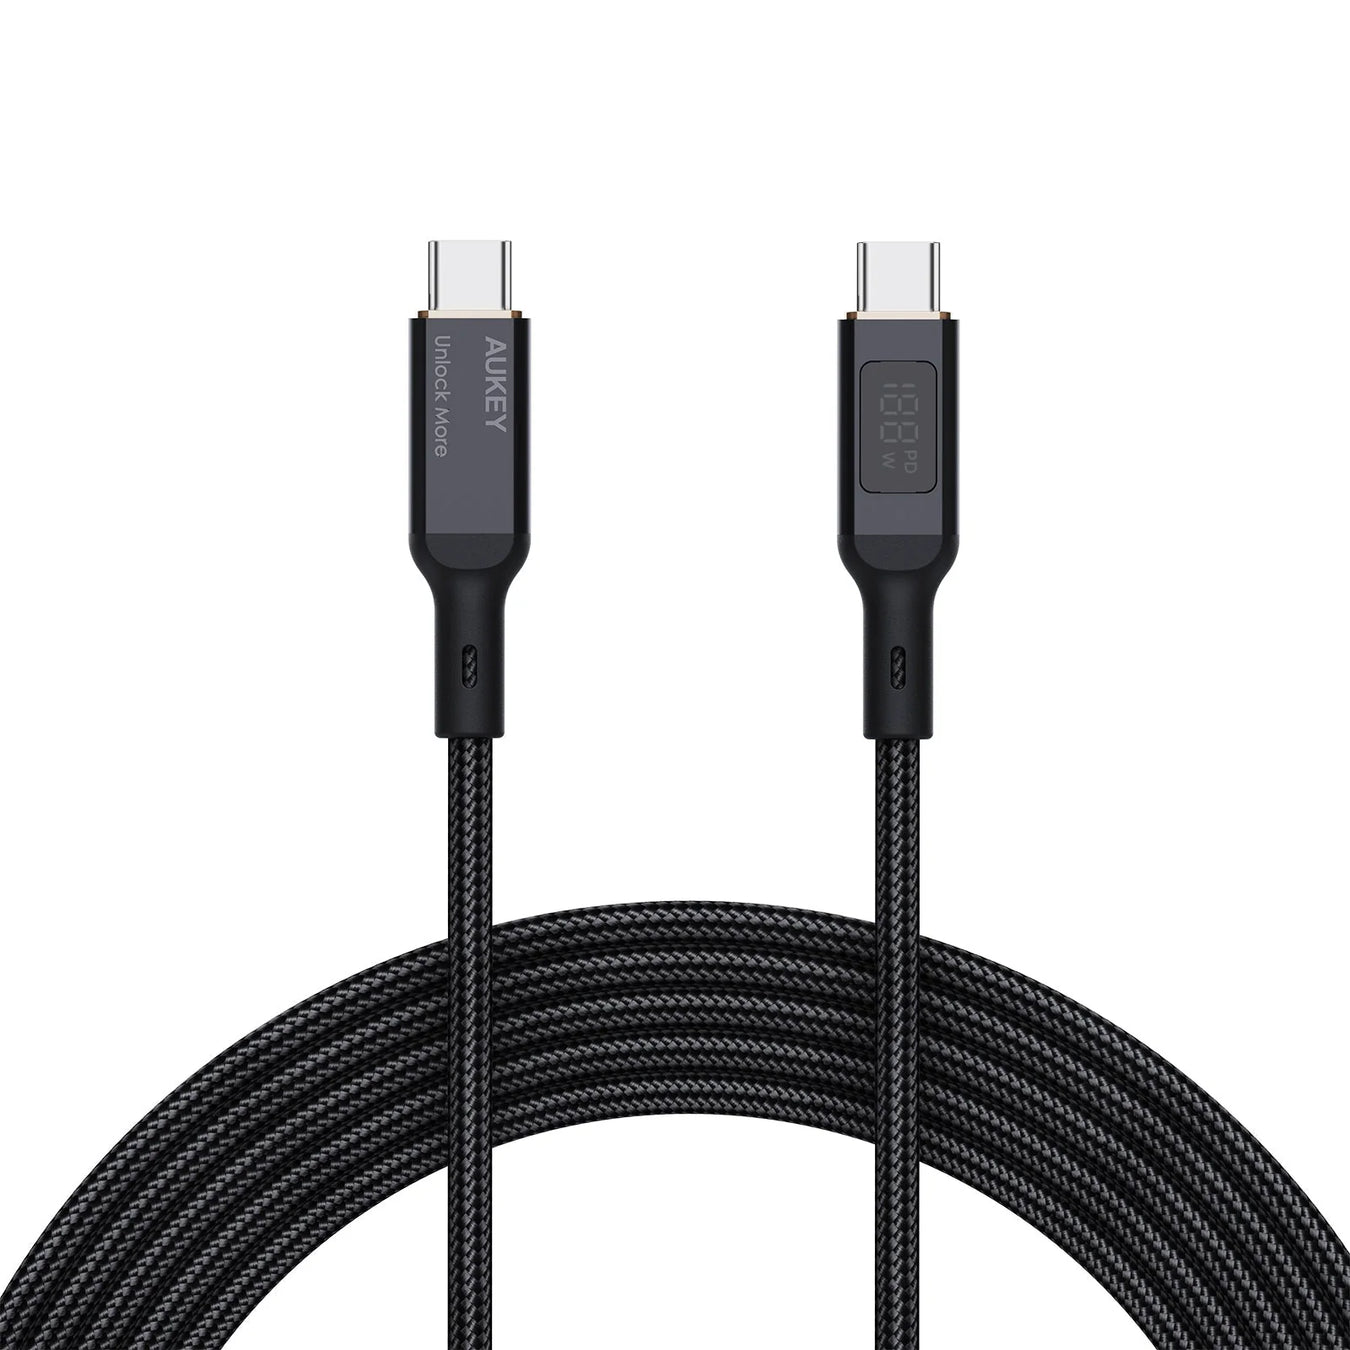 Aukey's Charging Cables